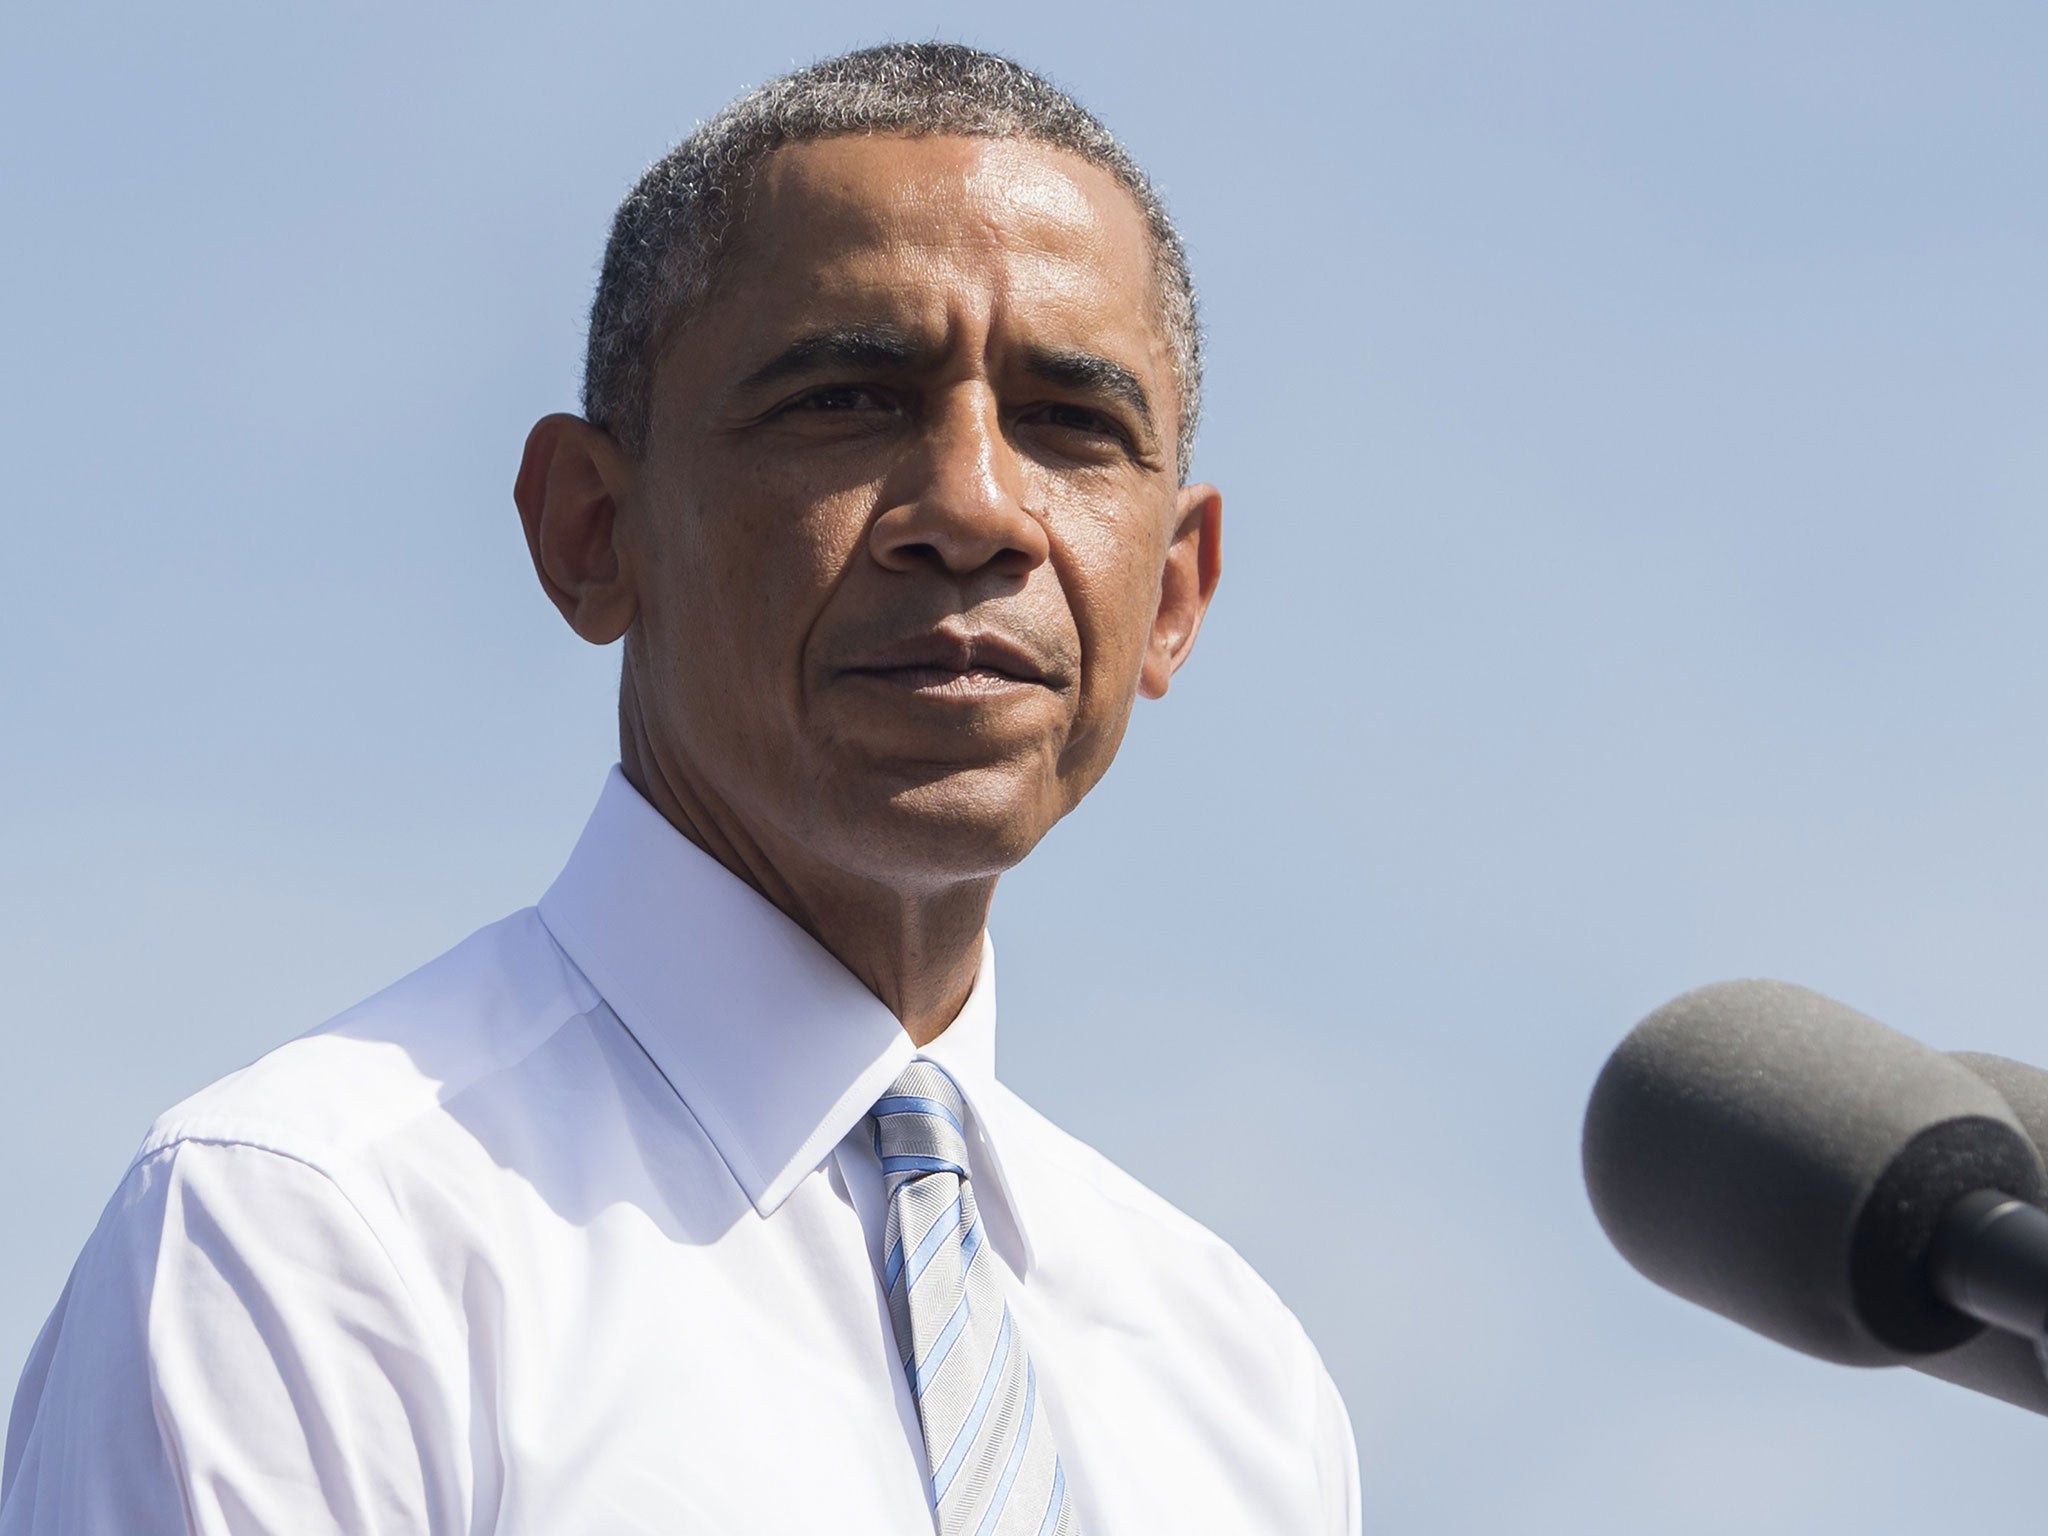 President Barack Obama says his policies are on the ballot